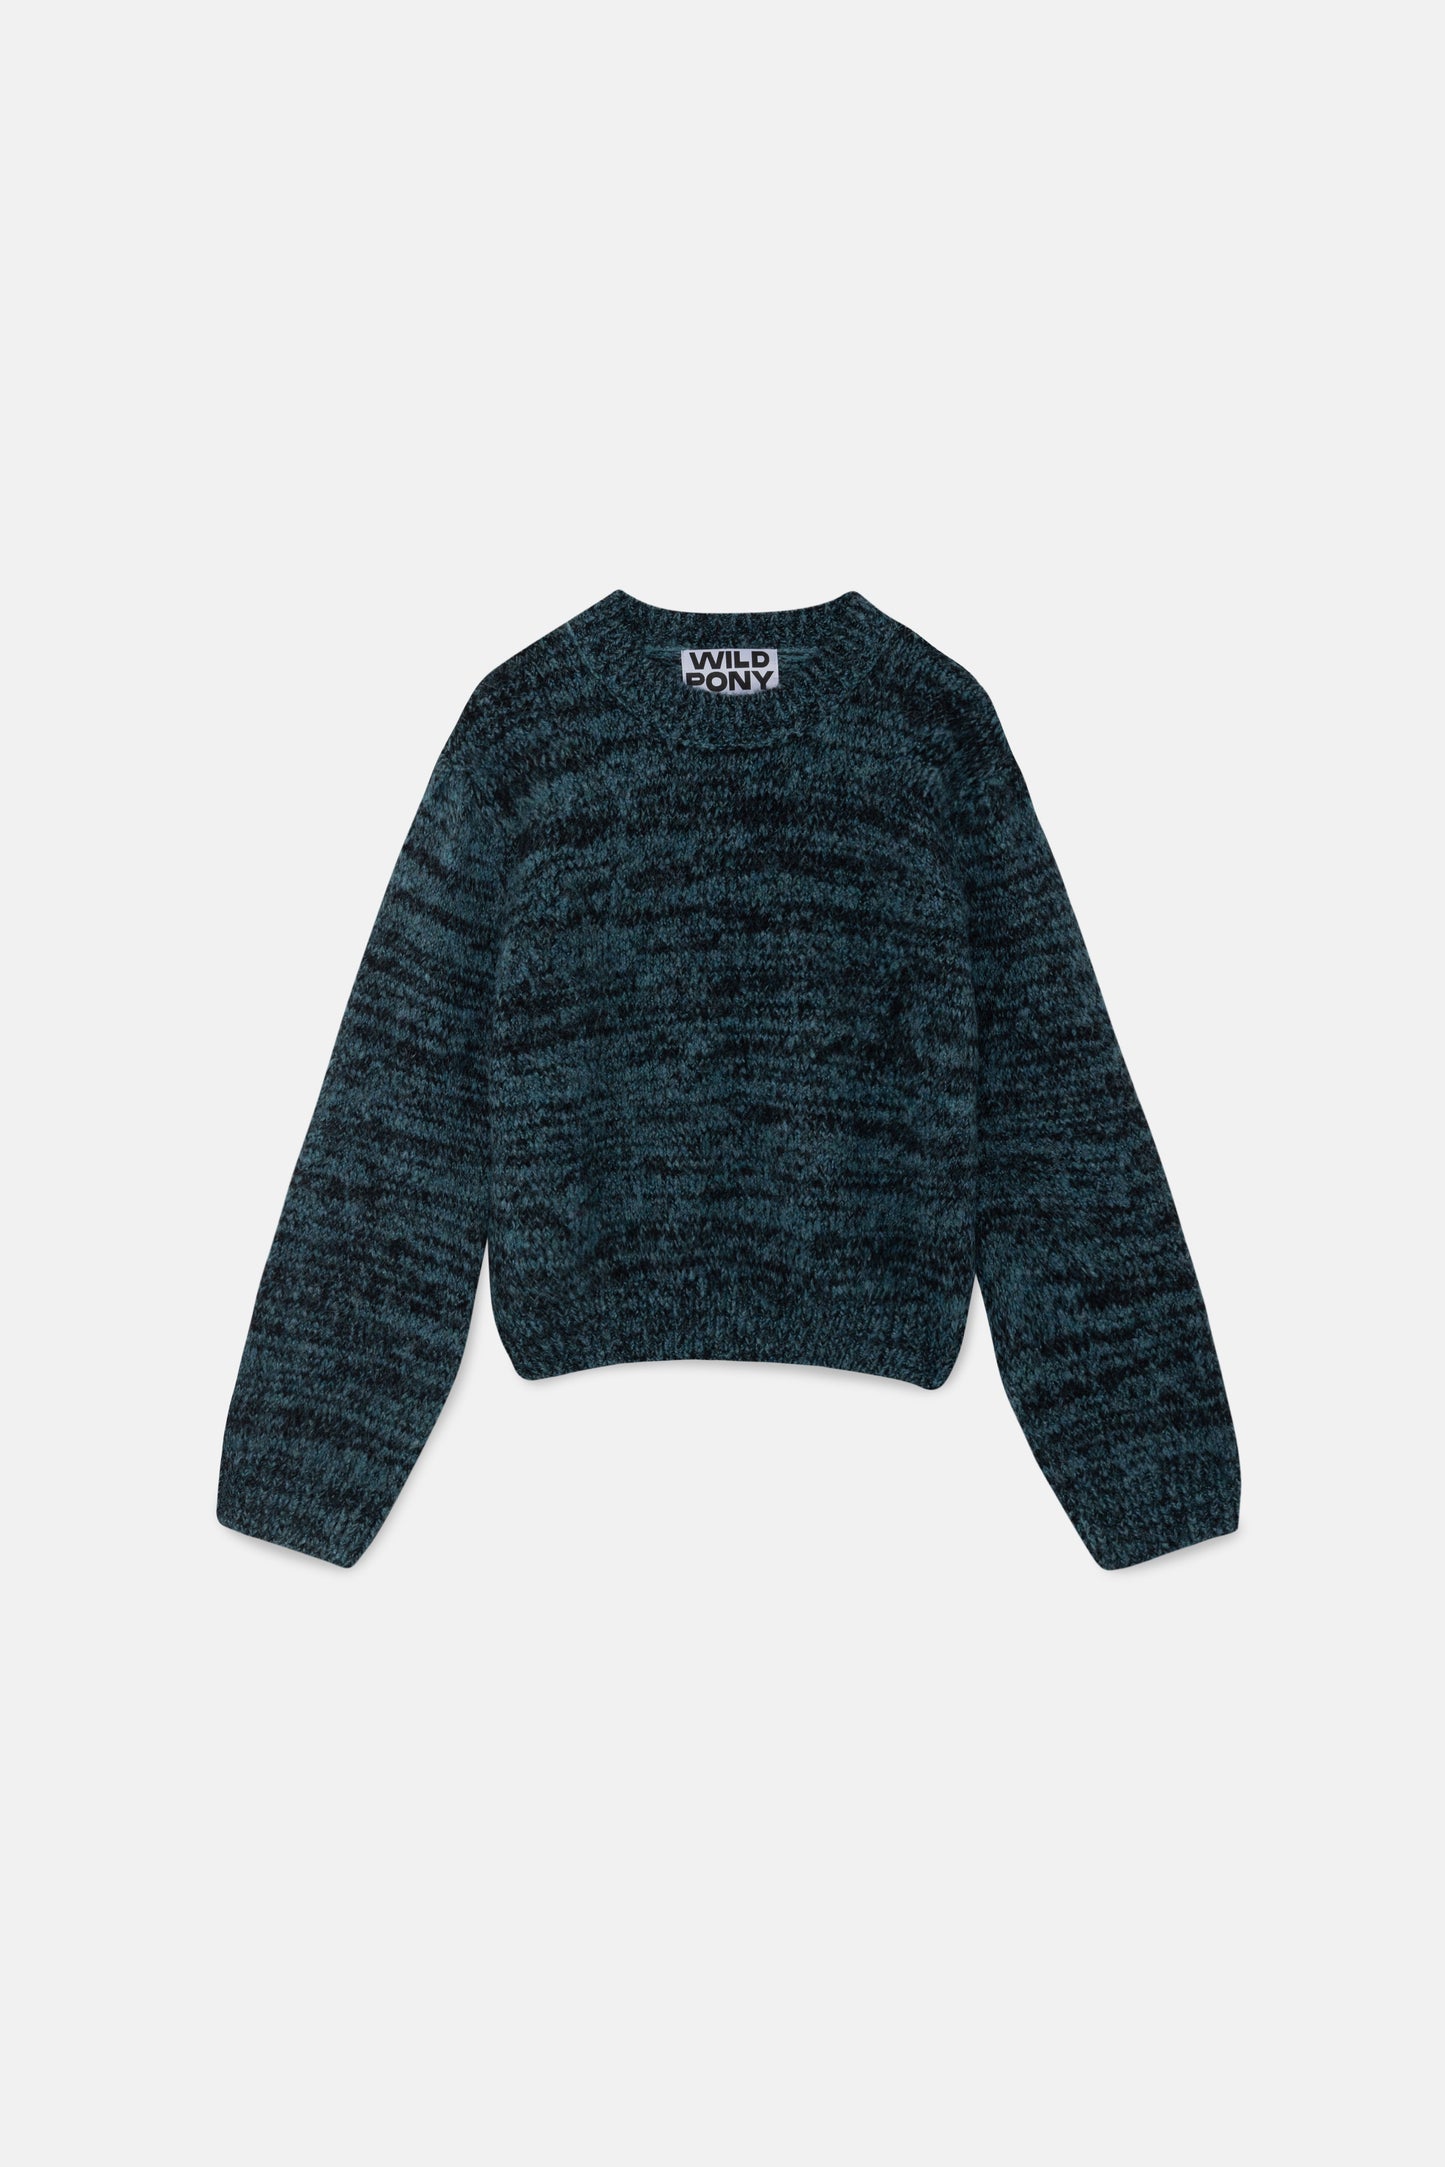 Blue Textured Knit Sweater